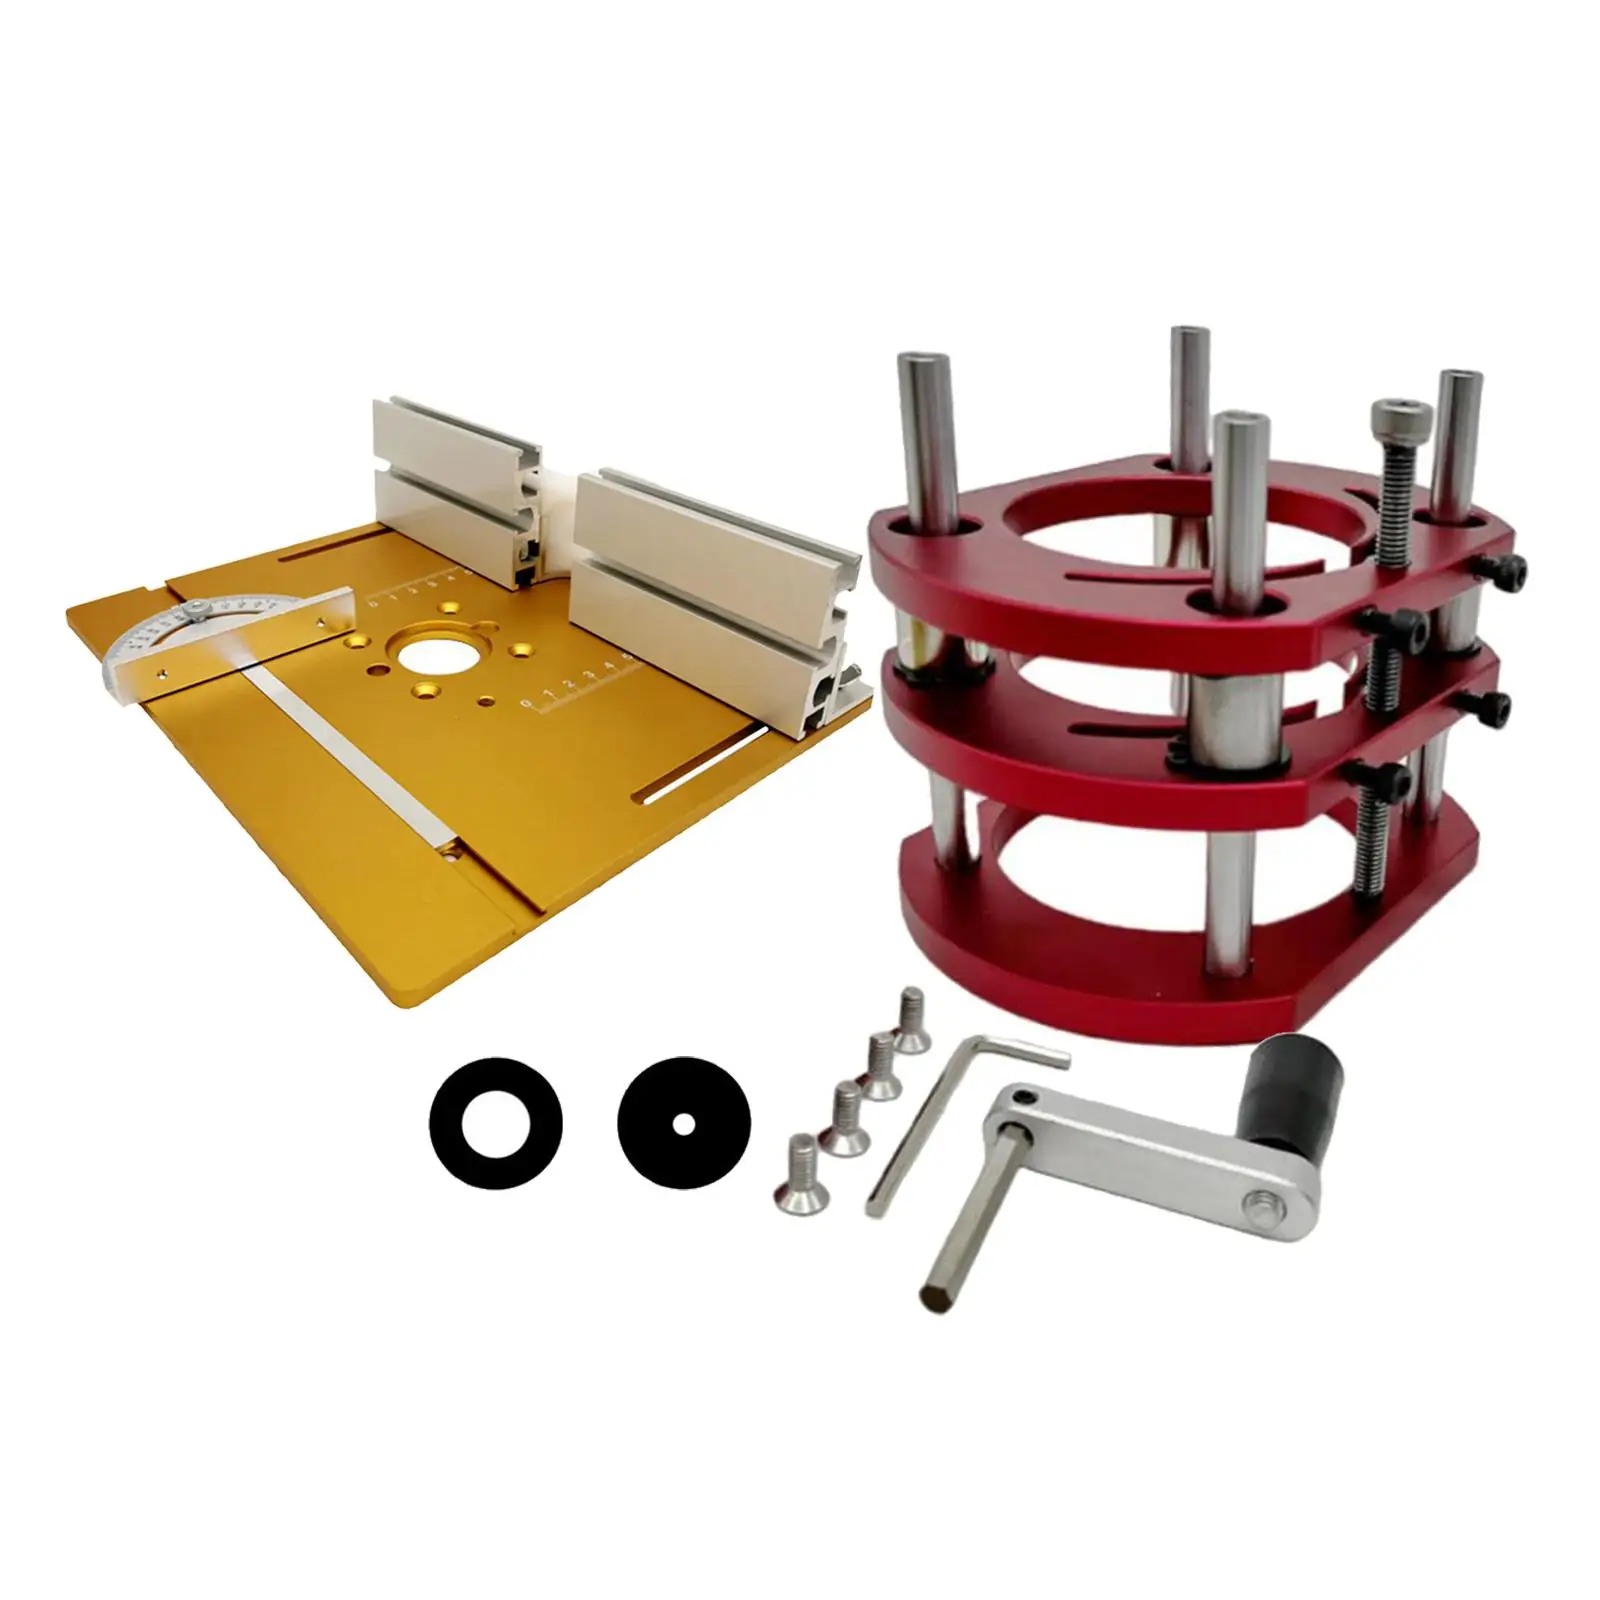 Woodworking Lifting Platform Stand with lifting base Router lifting system for 64-66mm Diameter Motors Milling Trimming Novices